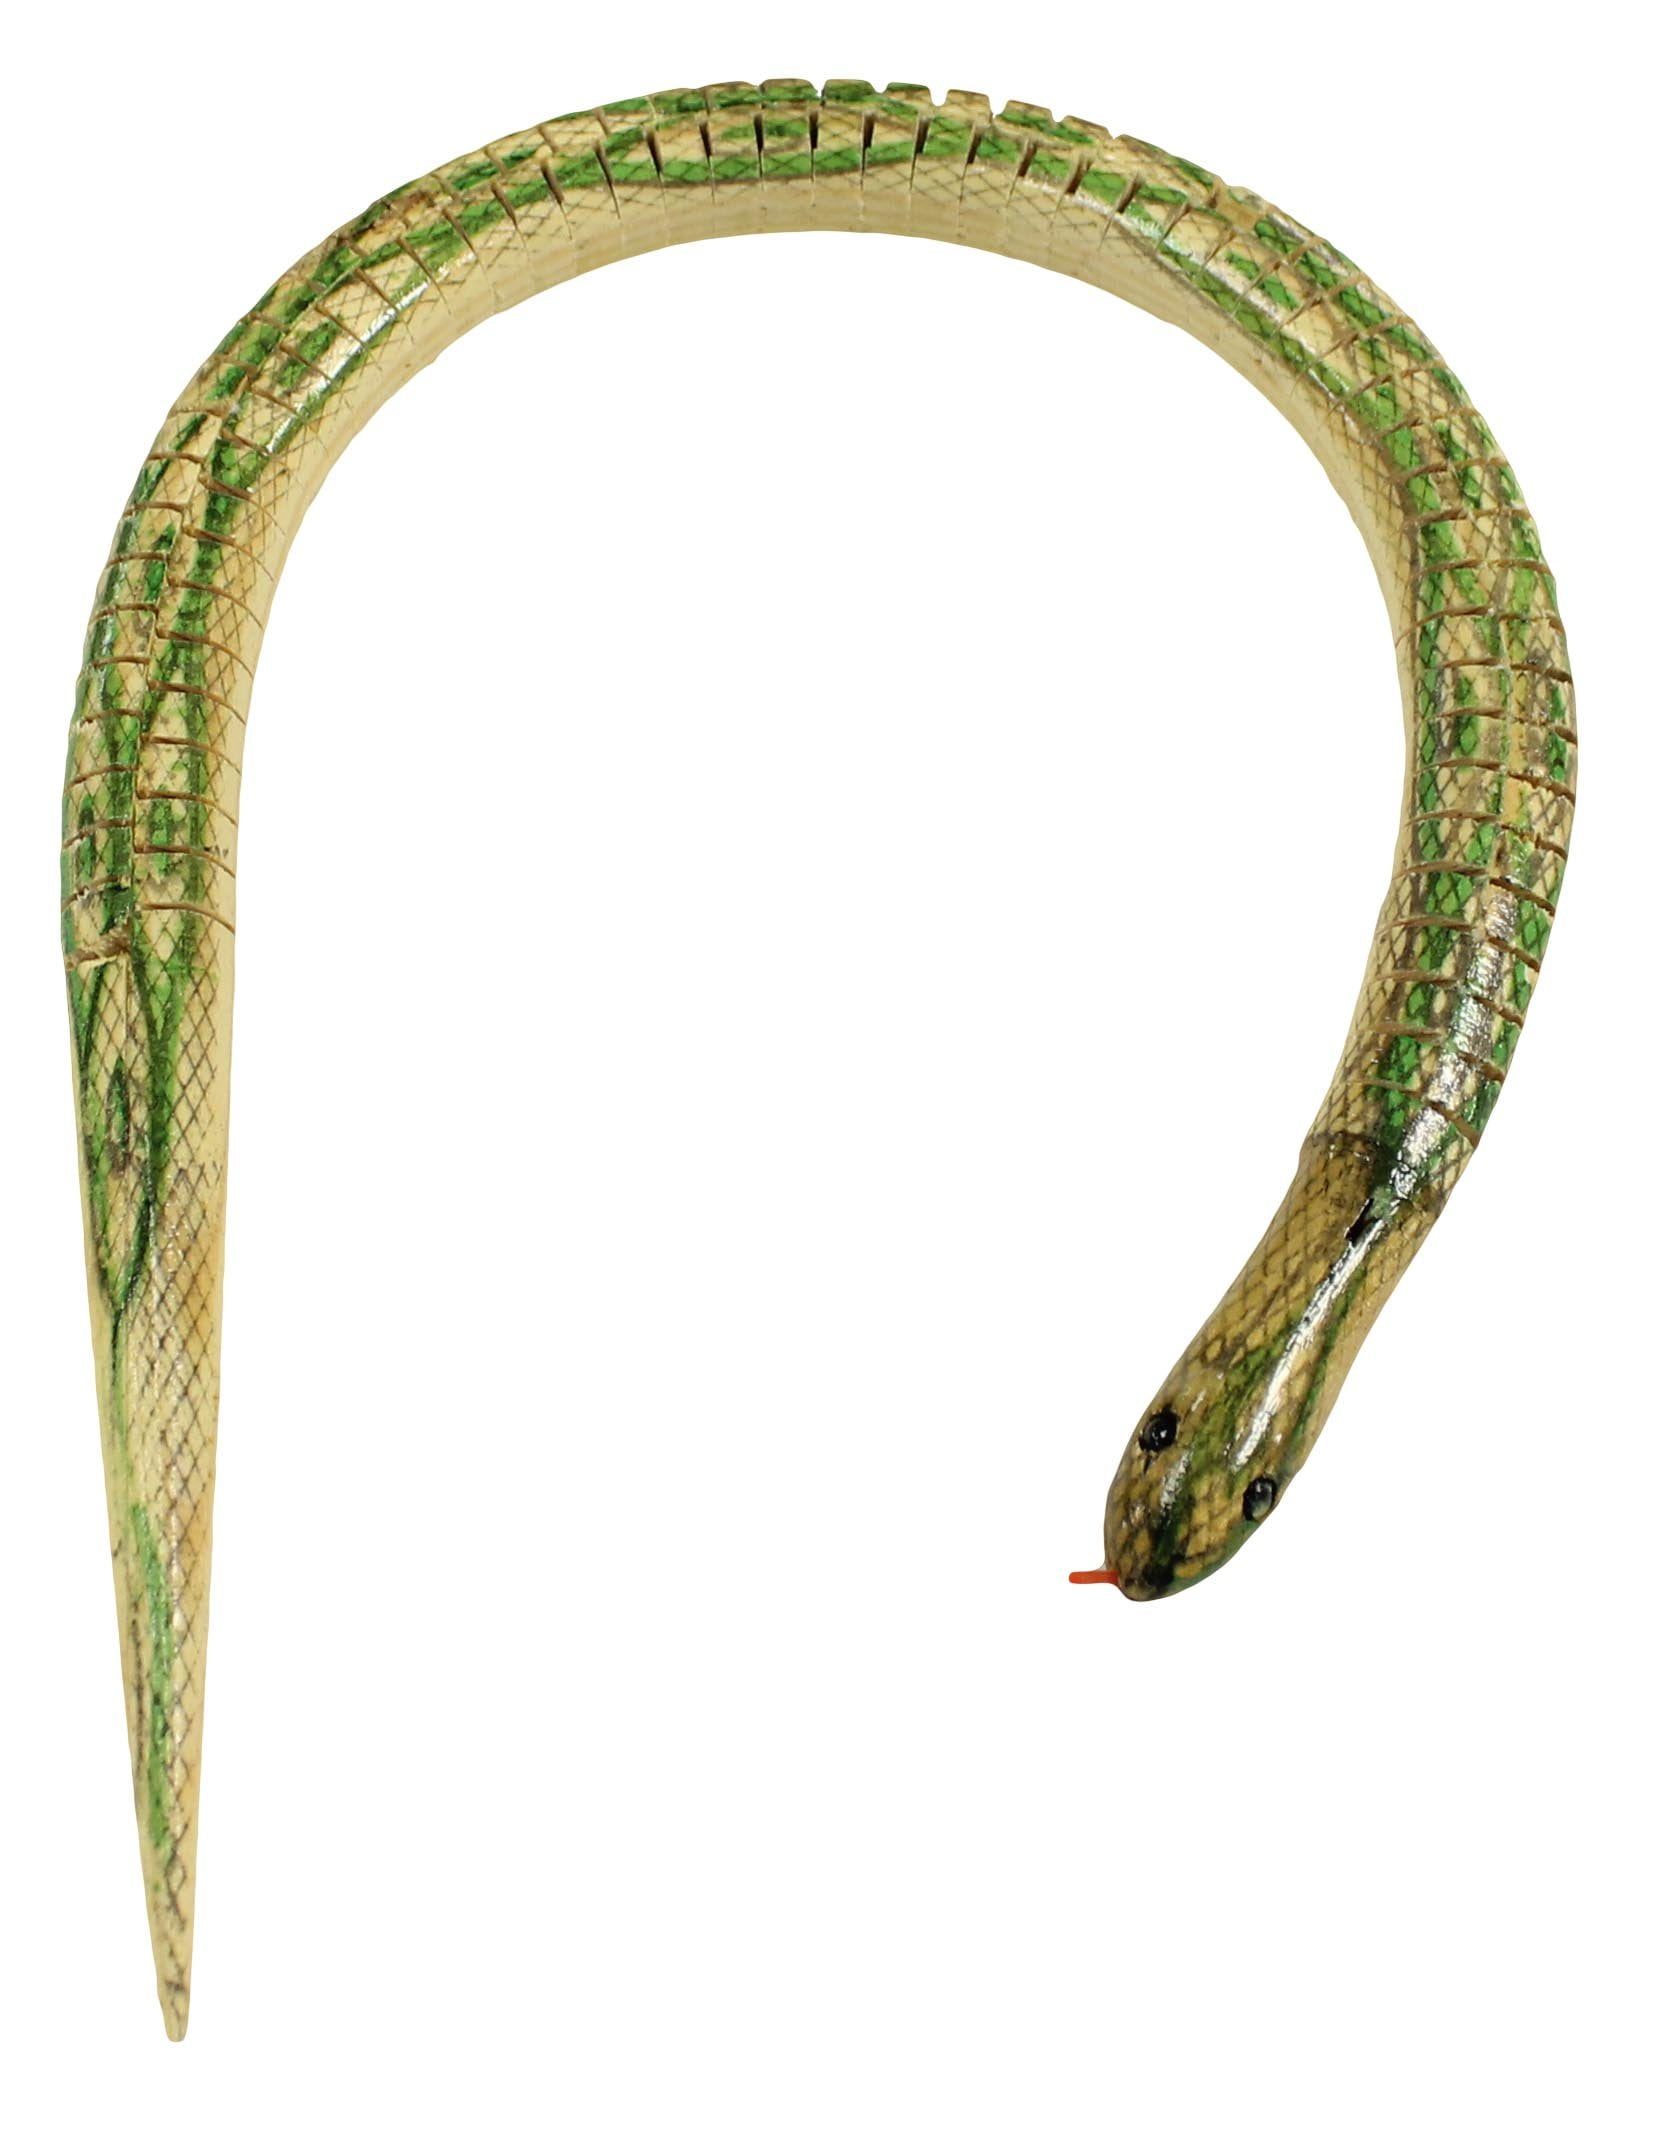 20 Inch Realistic Notched Painted Wood Wiggle Snake (Green) - Walmart.com